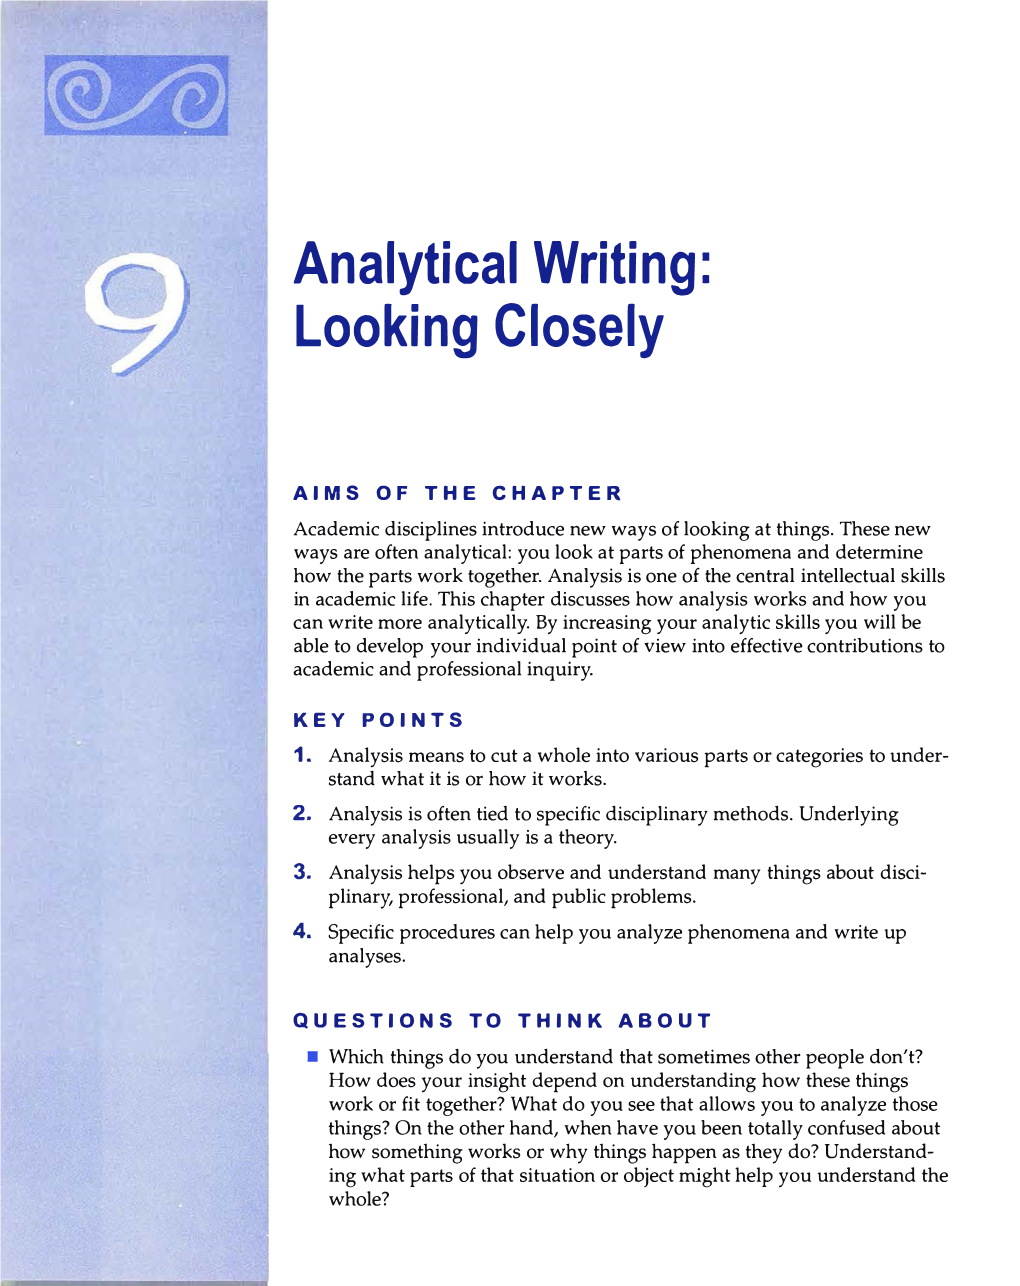 Analytical Writing: Looking Closely